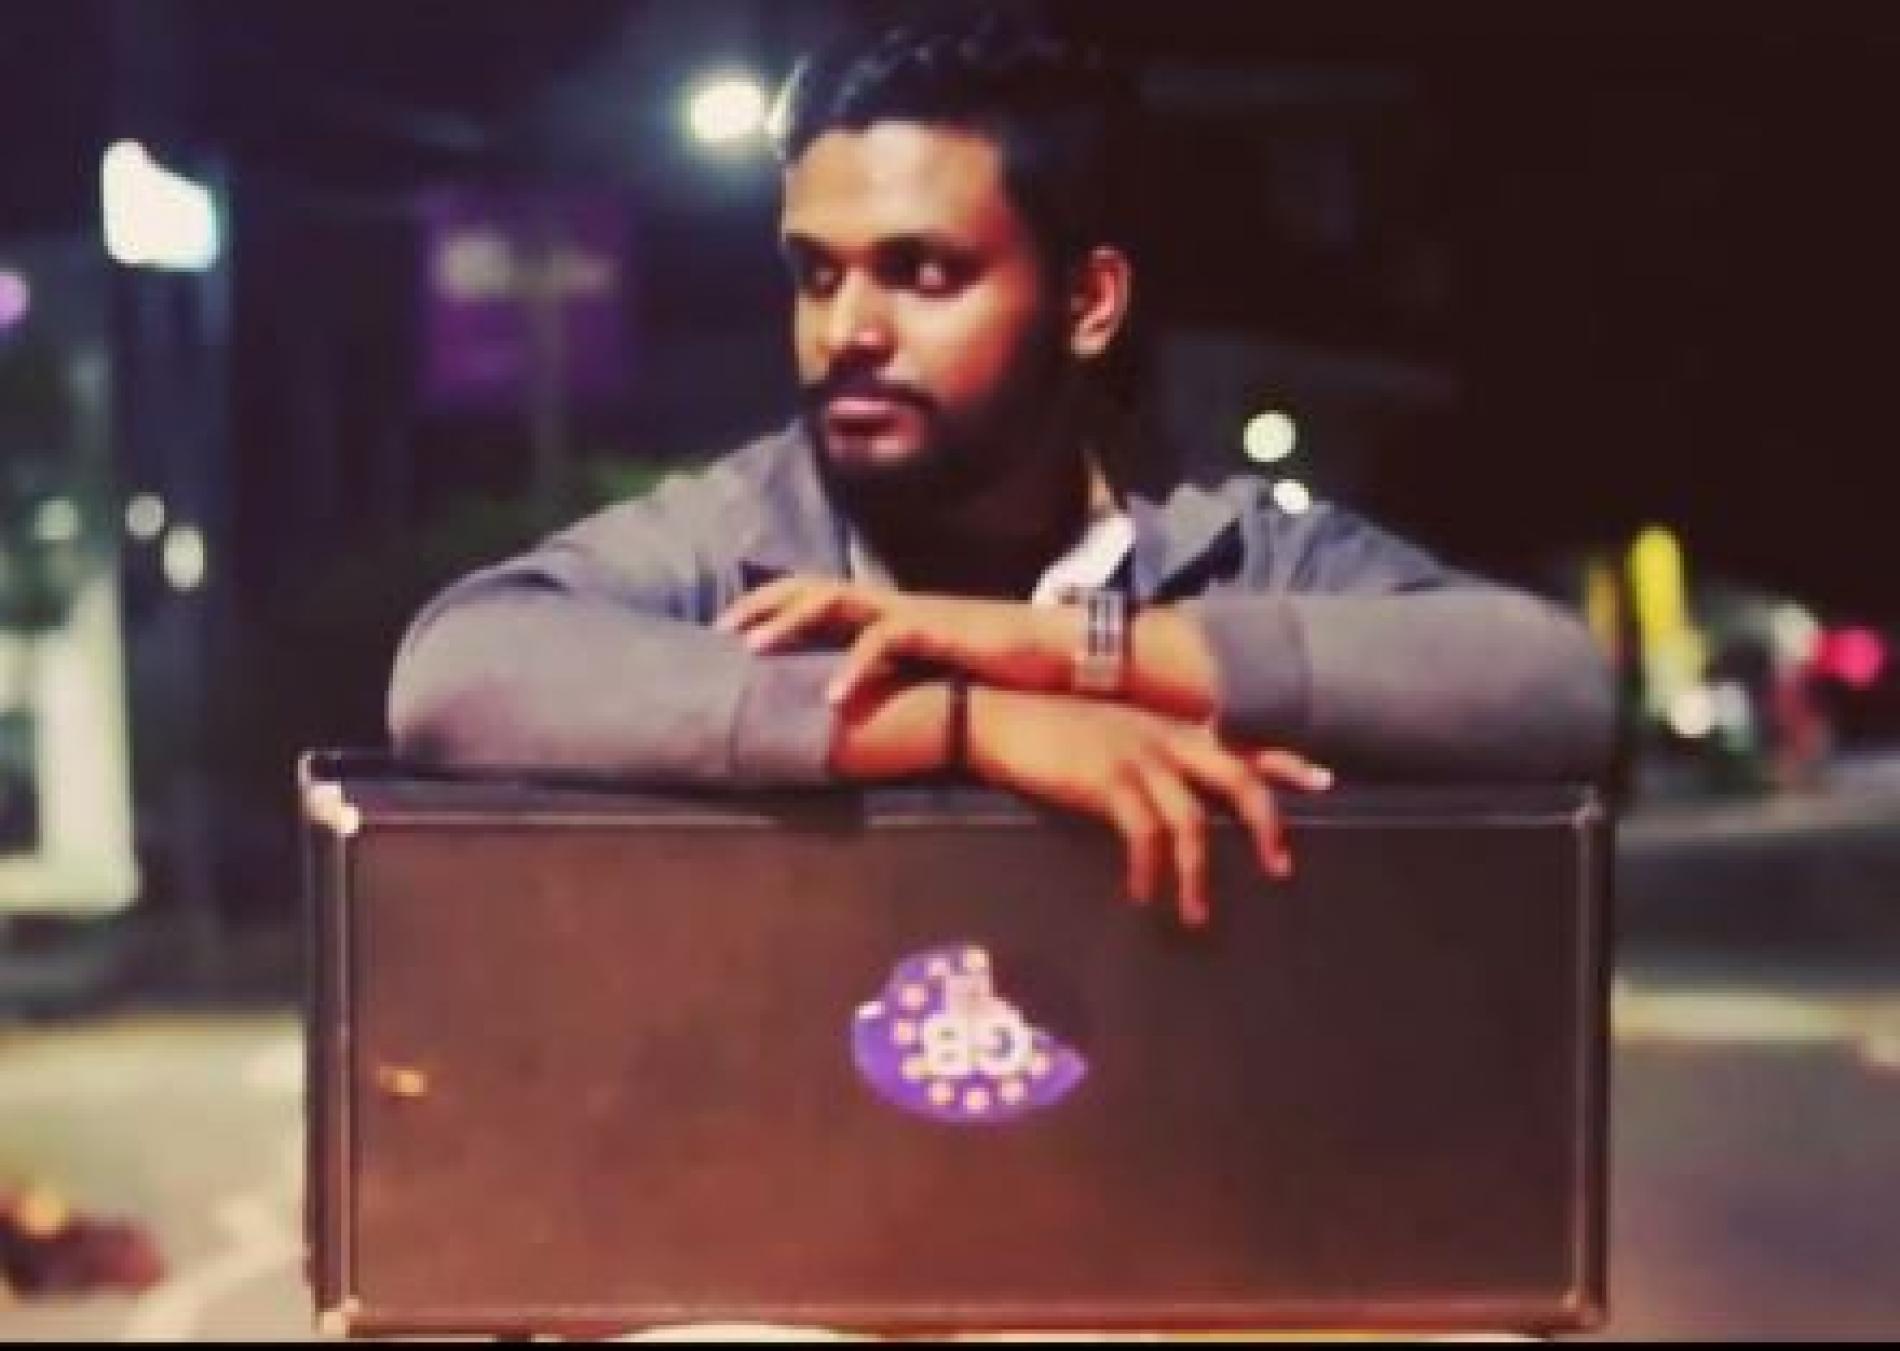 New Music : Bad Liar Saxophone Cover By Chamith Madushan